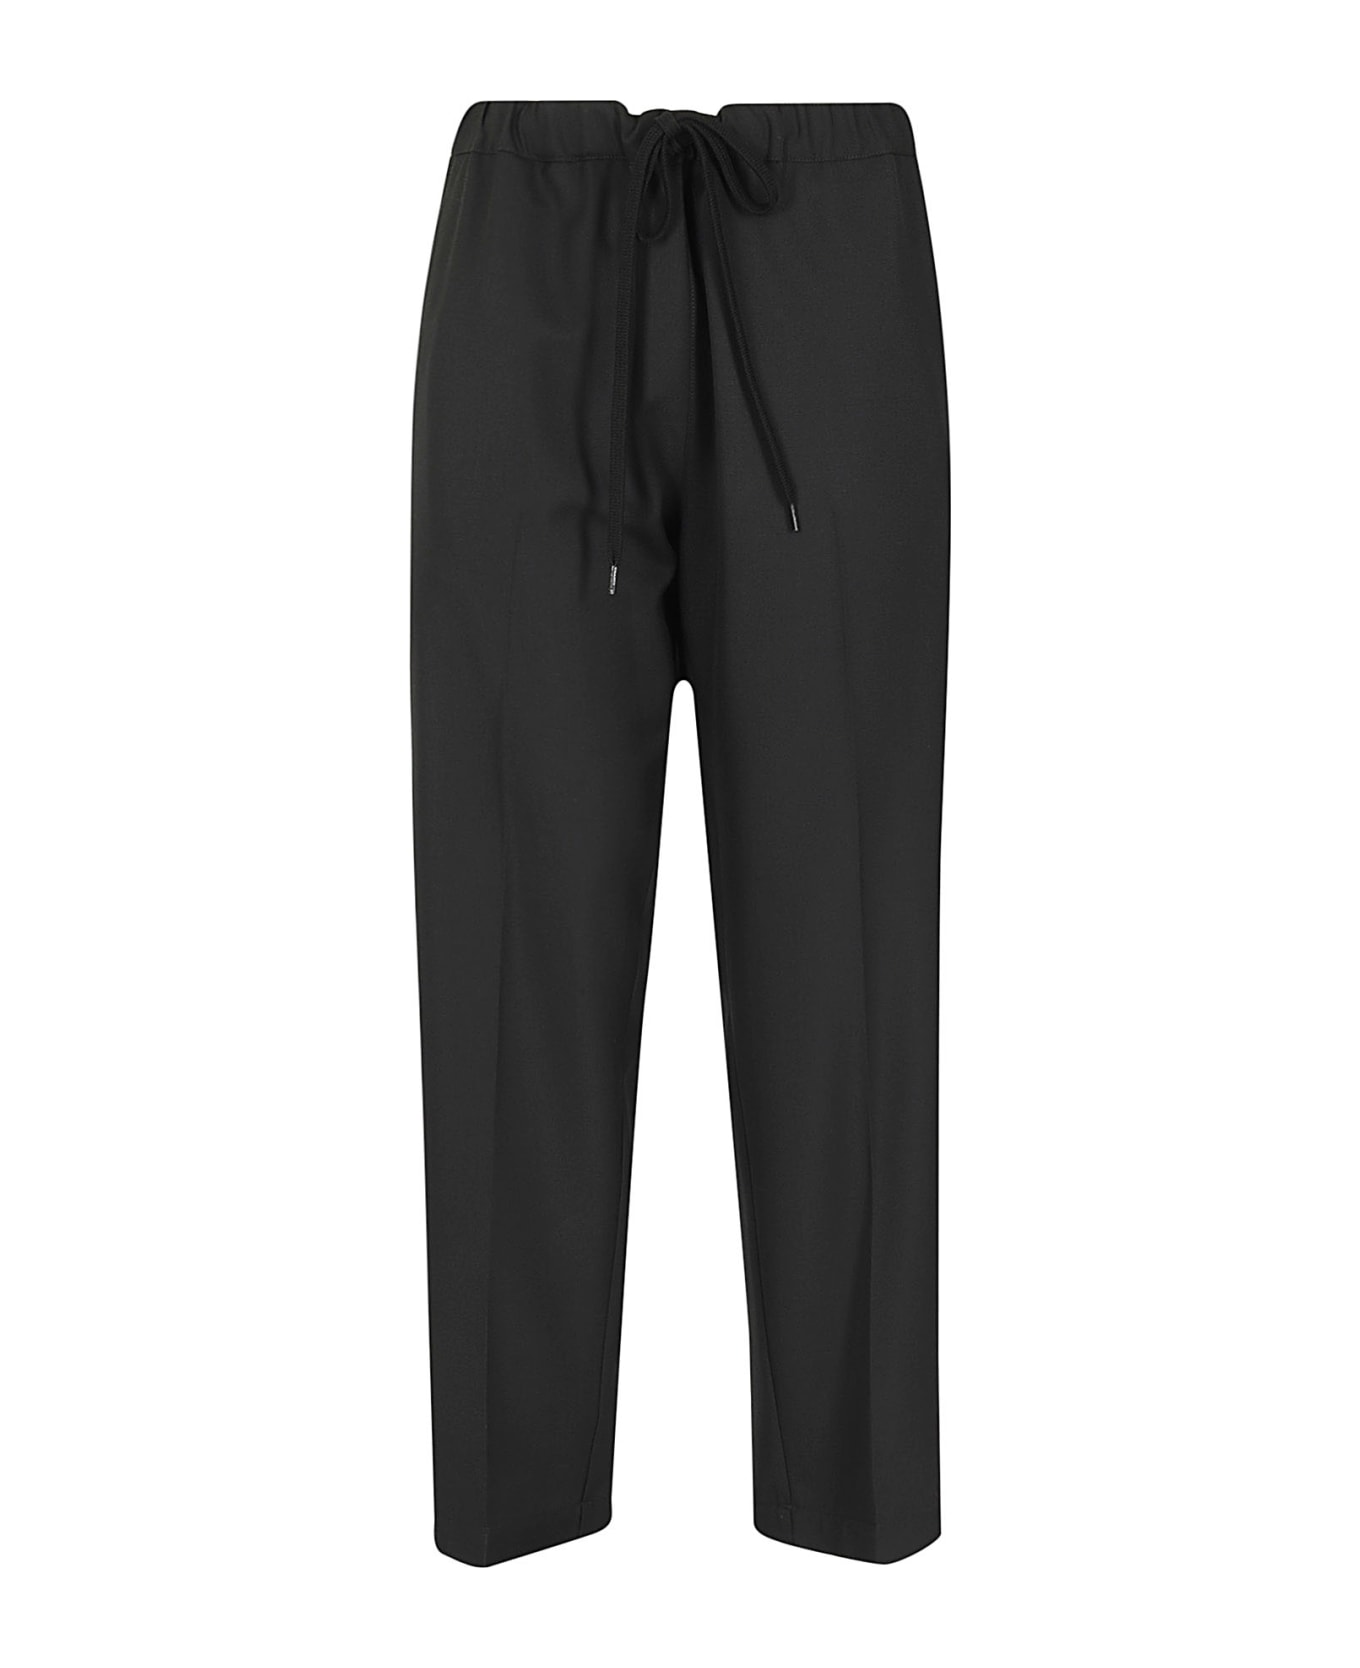 MM6 Maison Margiela Tapered Tailored Trousers - Black ボトムス